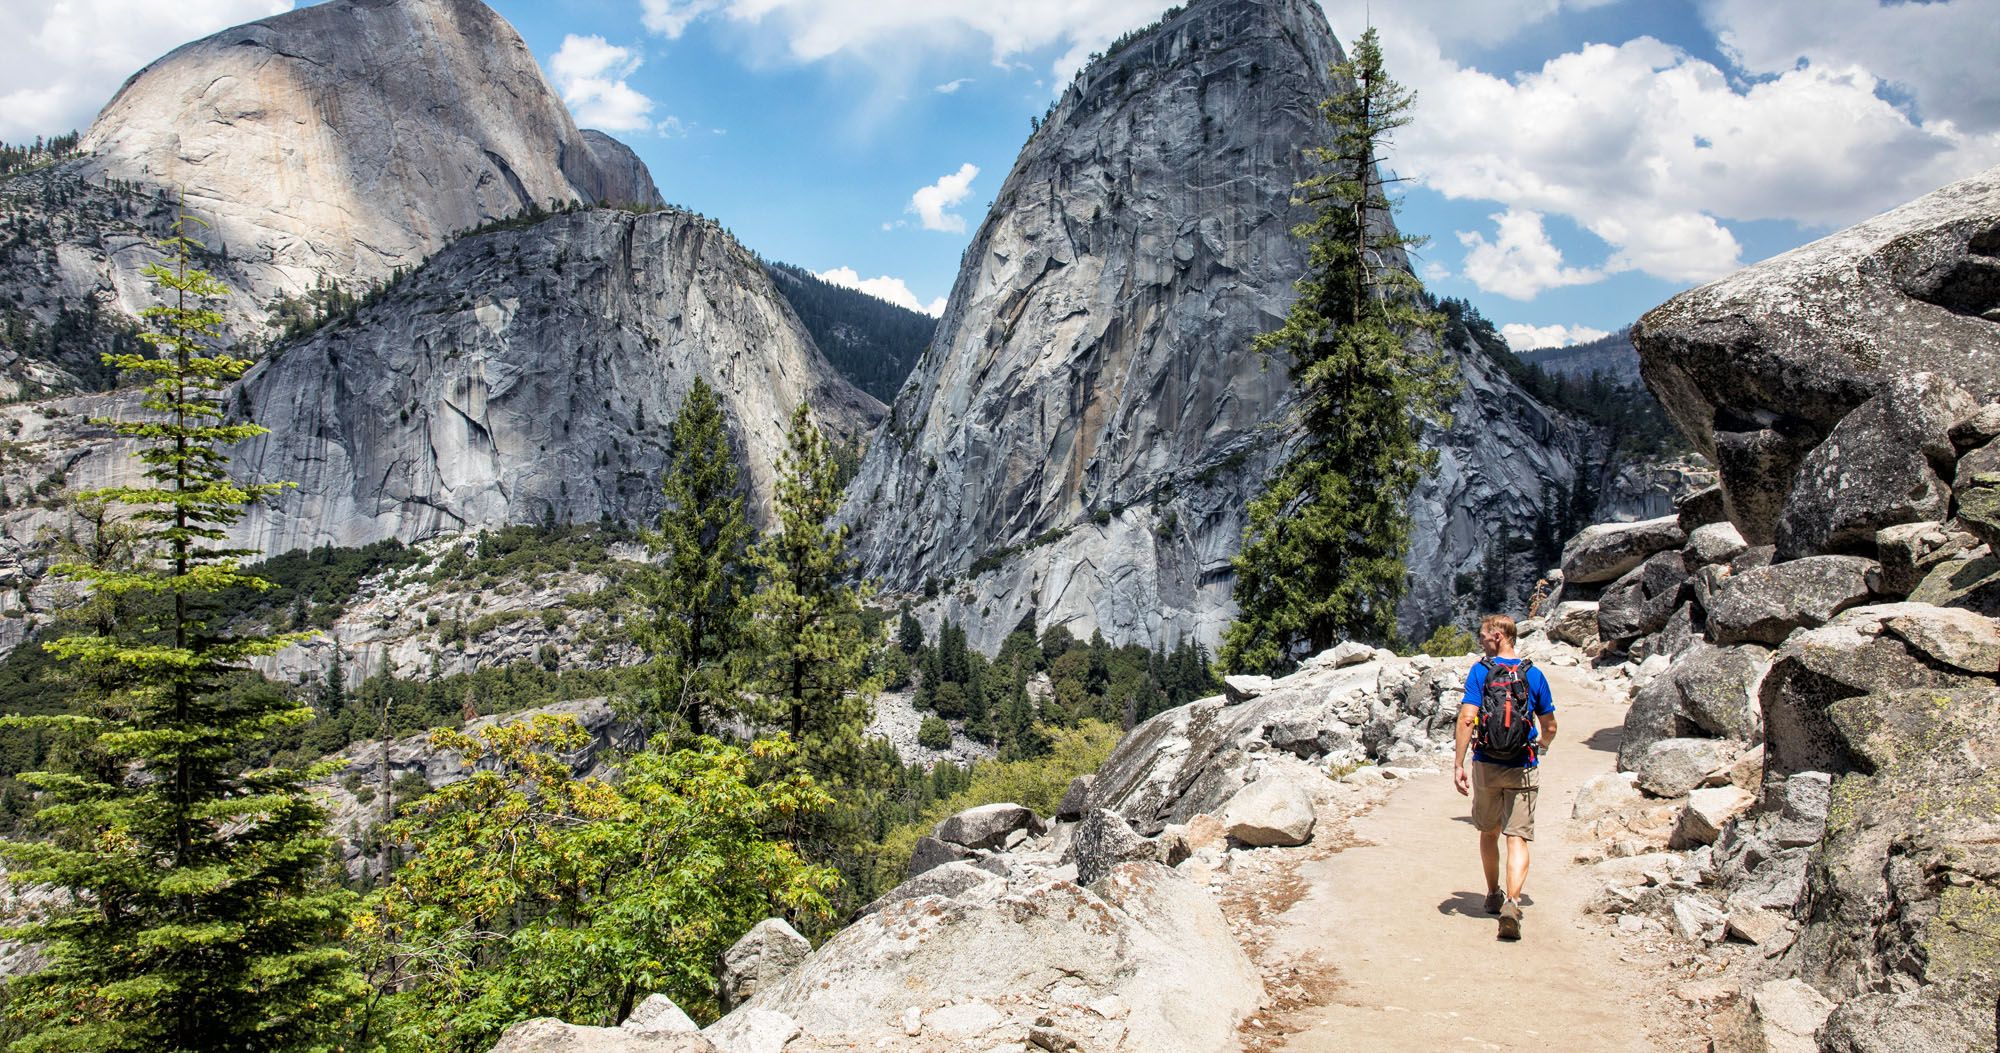 Essential Hiking Gear: What Should You Bring on a Day Hike? – Earth Trekkers